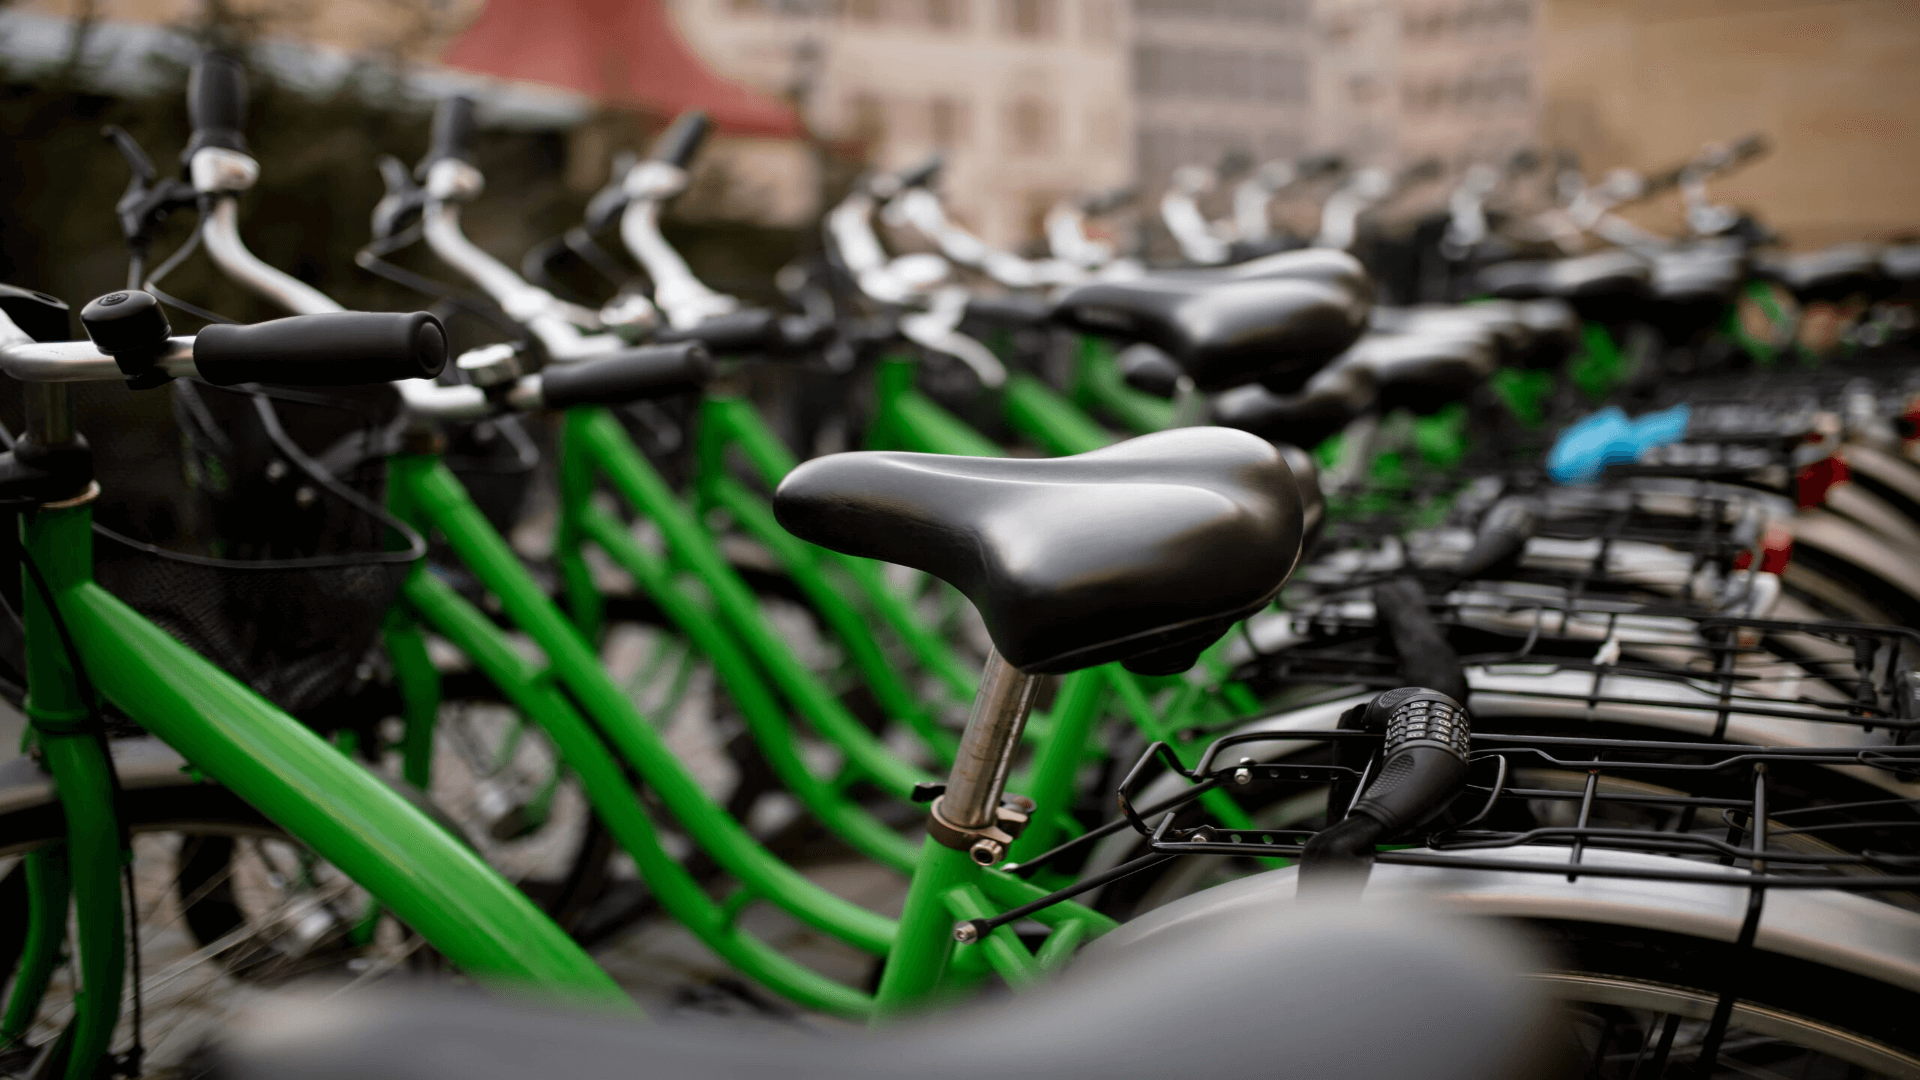 A collection of green bikes in buapest